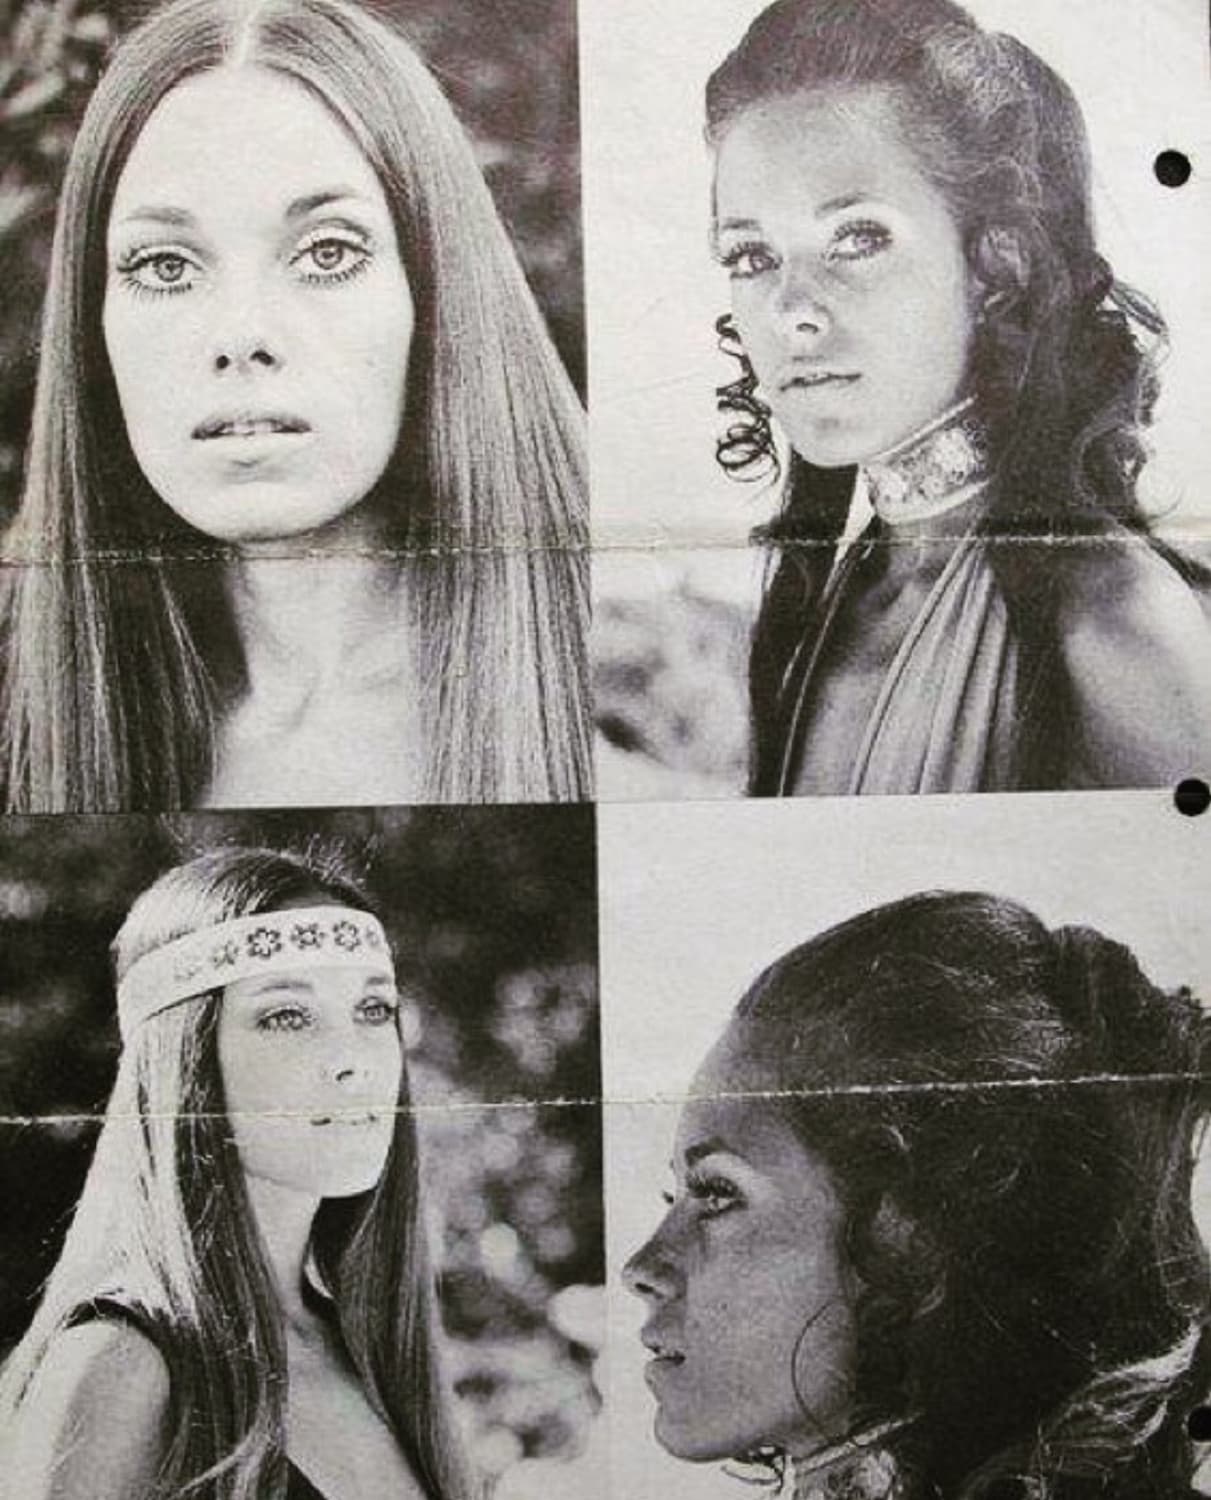 Marcheline Bertrand (Angelina Jolie's mother) modelling in the 1960s